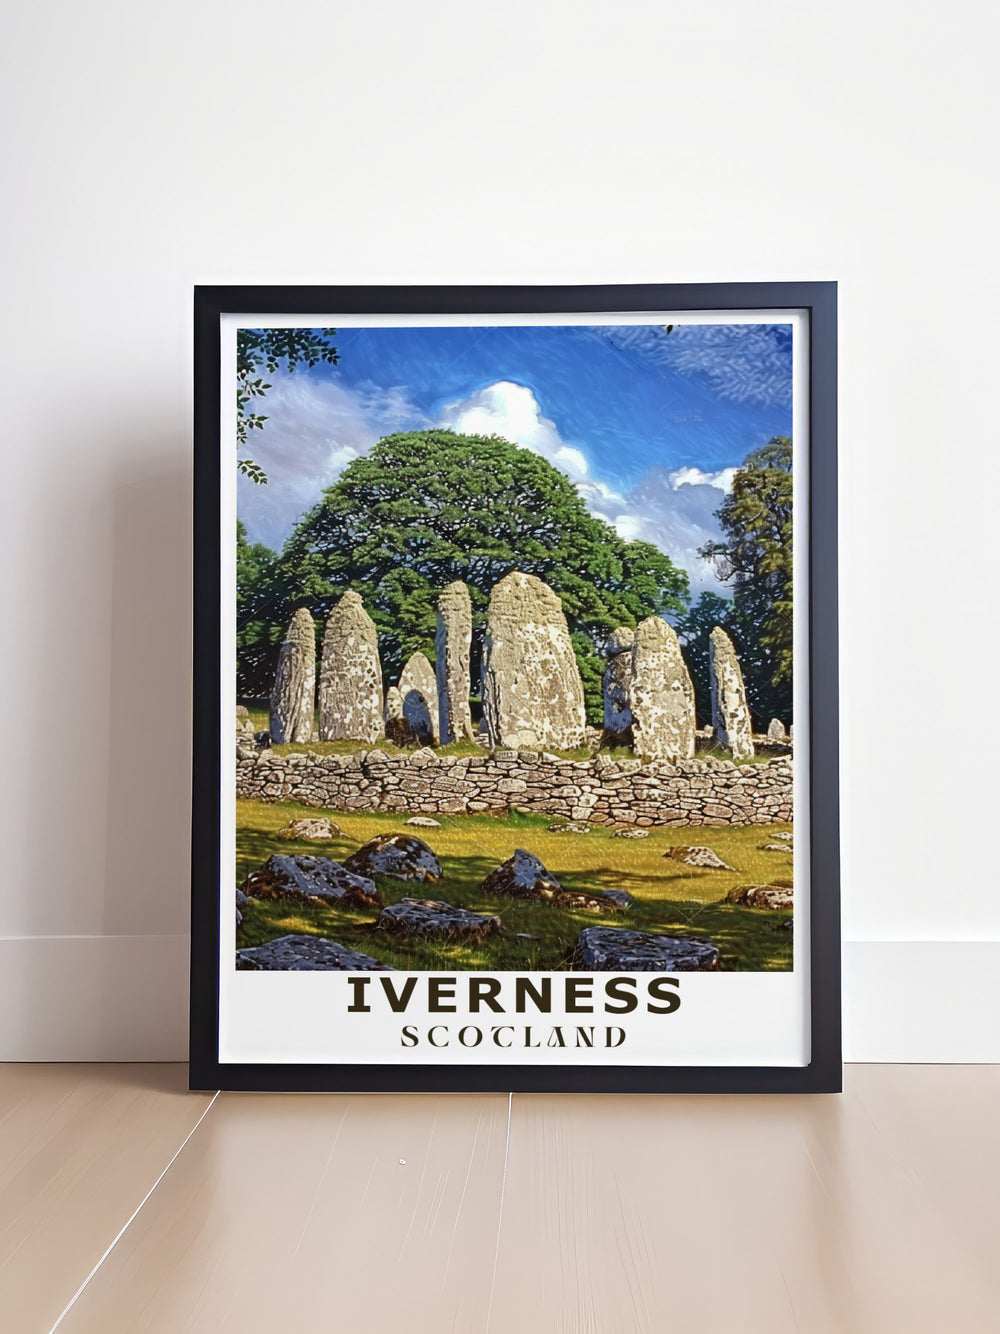 Fine art print of Inverness Castle with the serene River Ness in the foreground, capturing the blend of history and natural beauty in the Scottish Highlands.